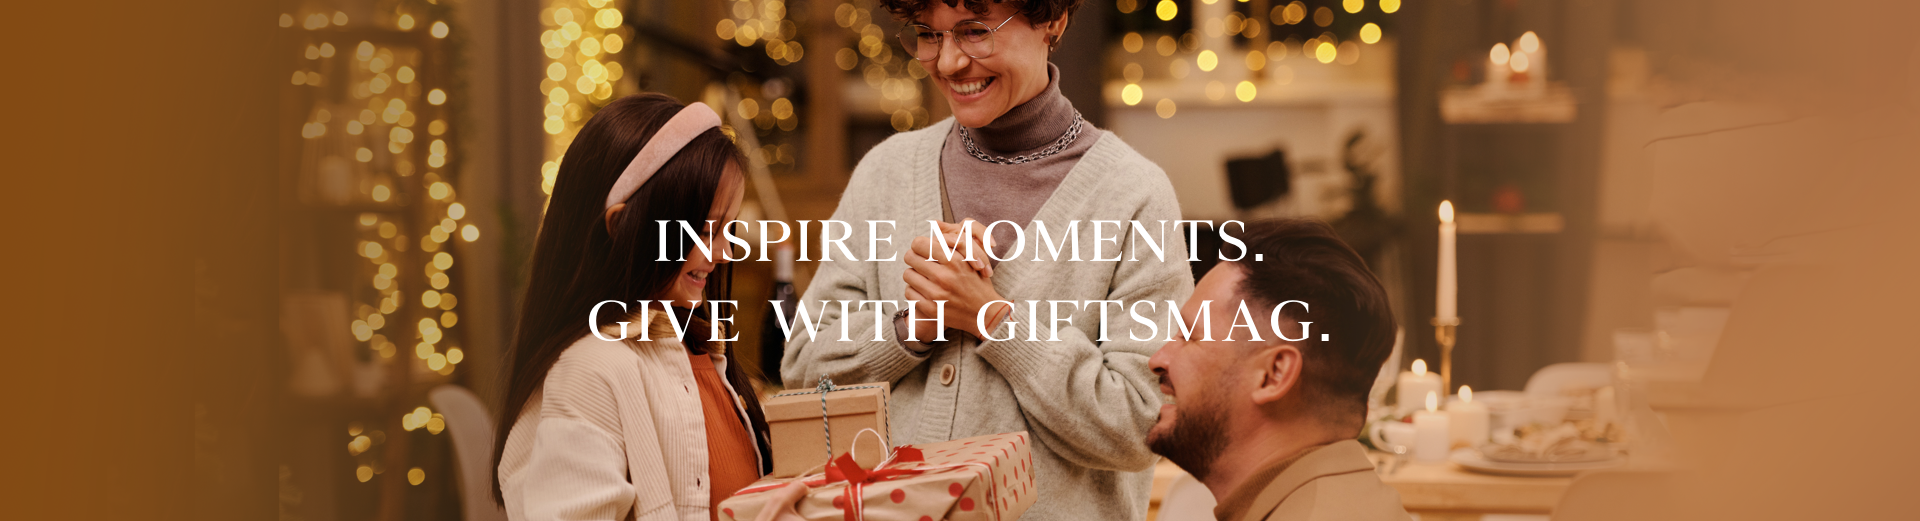 giftsmag official site